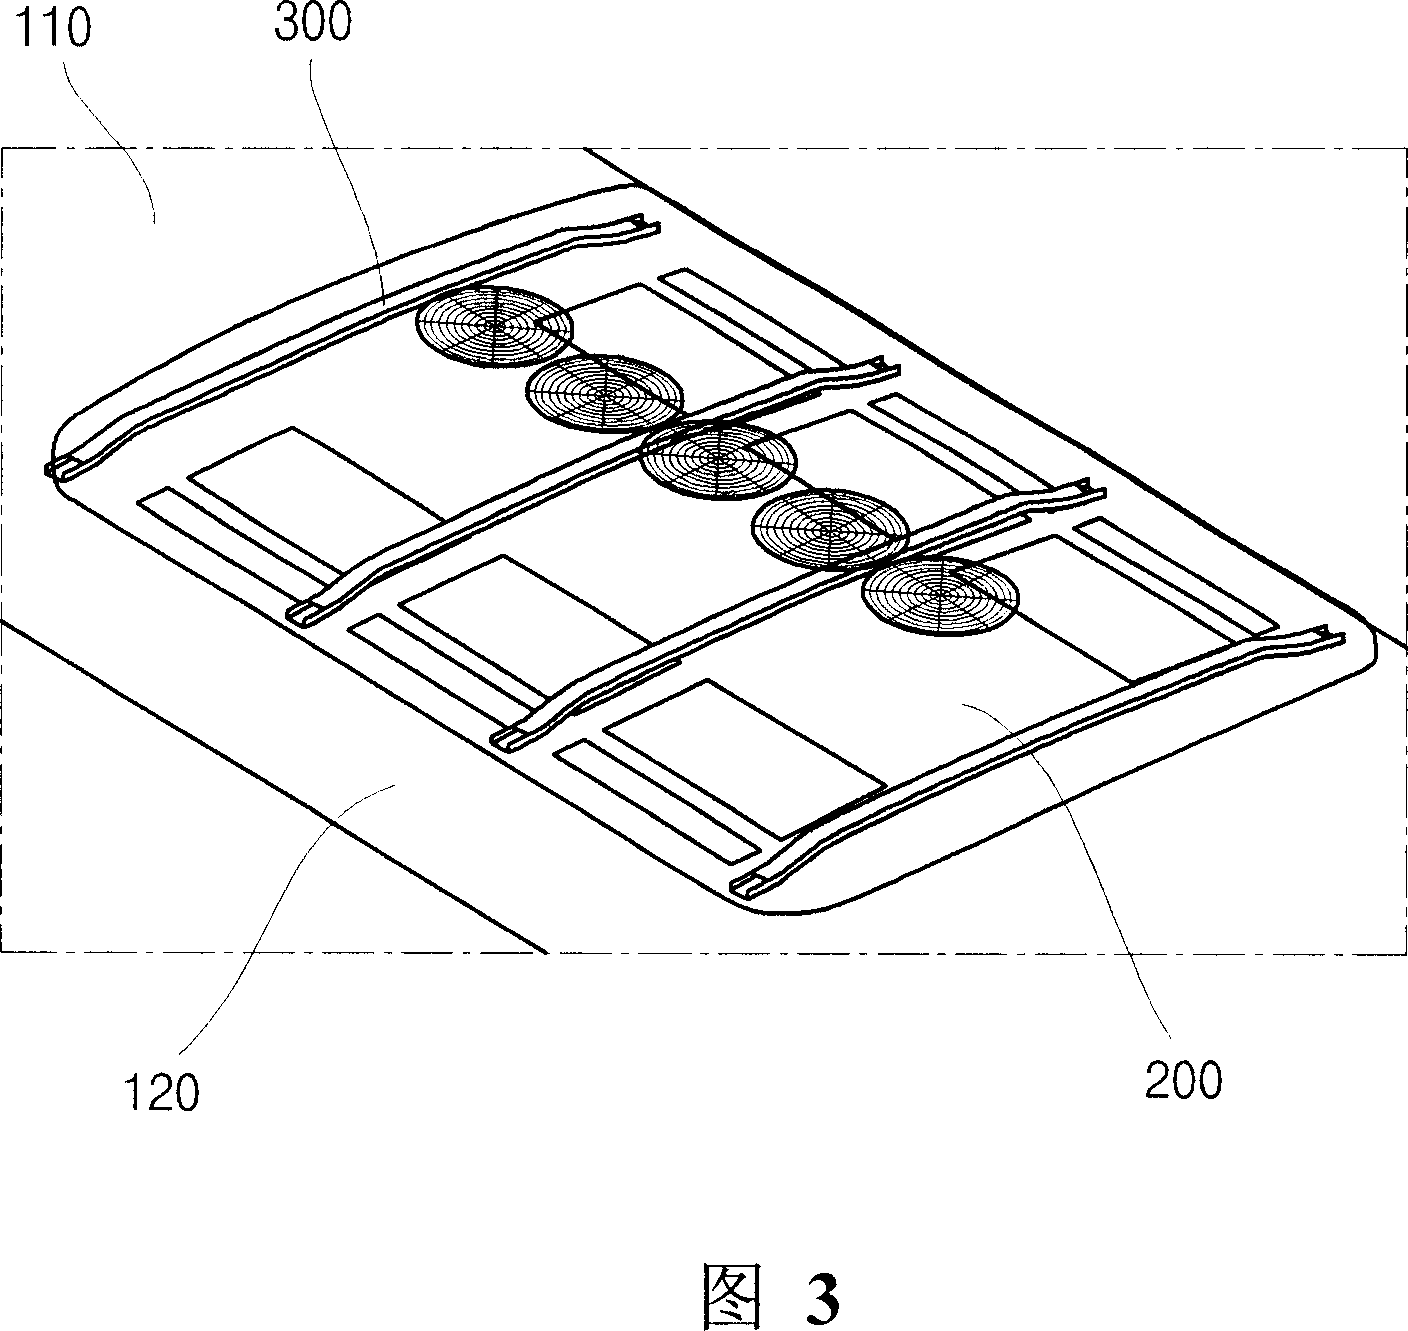 A fabricating structure of a roof-type airconditioner for a vehicle being unified condenser and evaporater